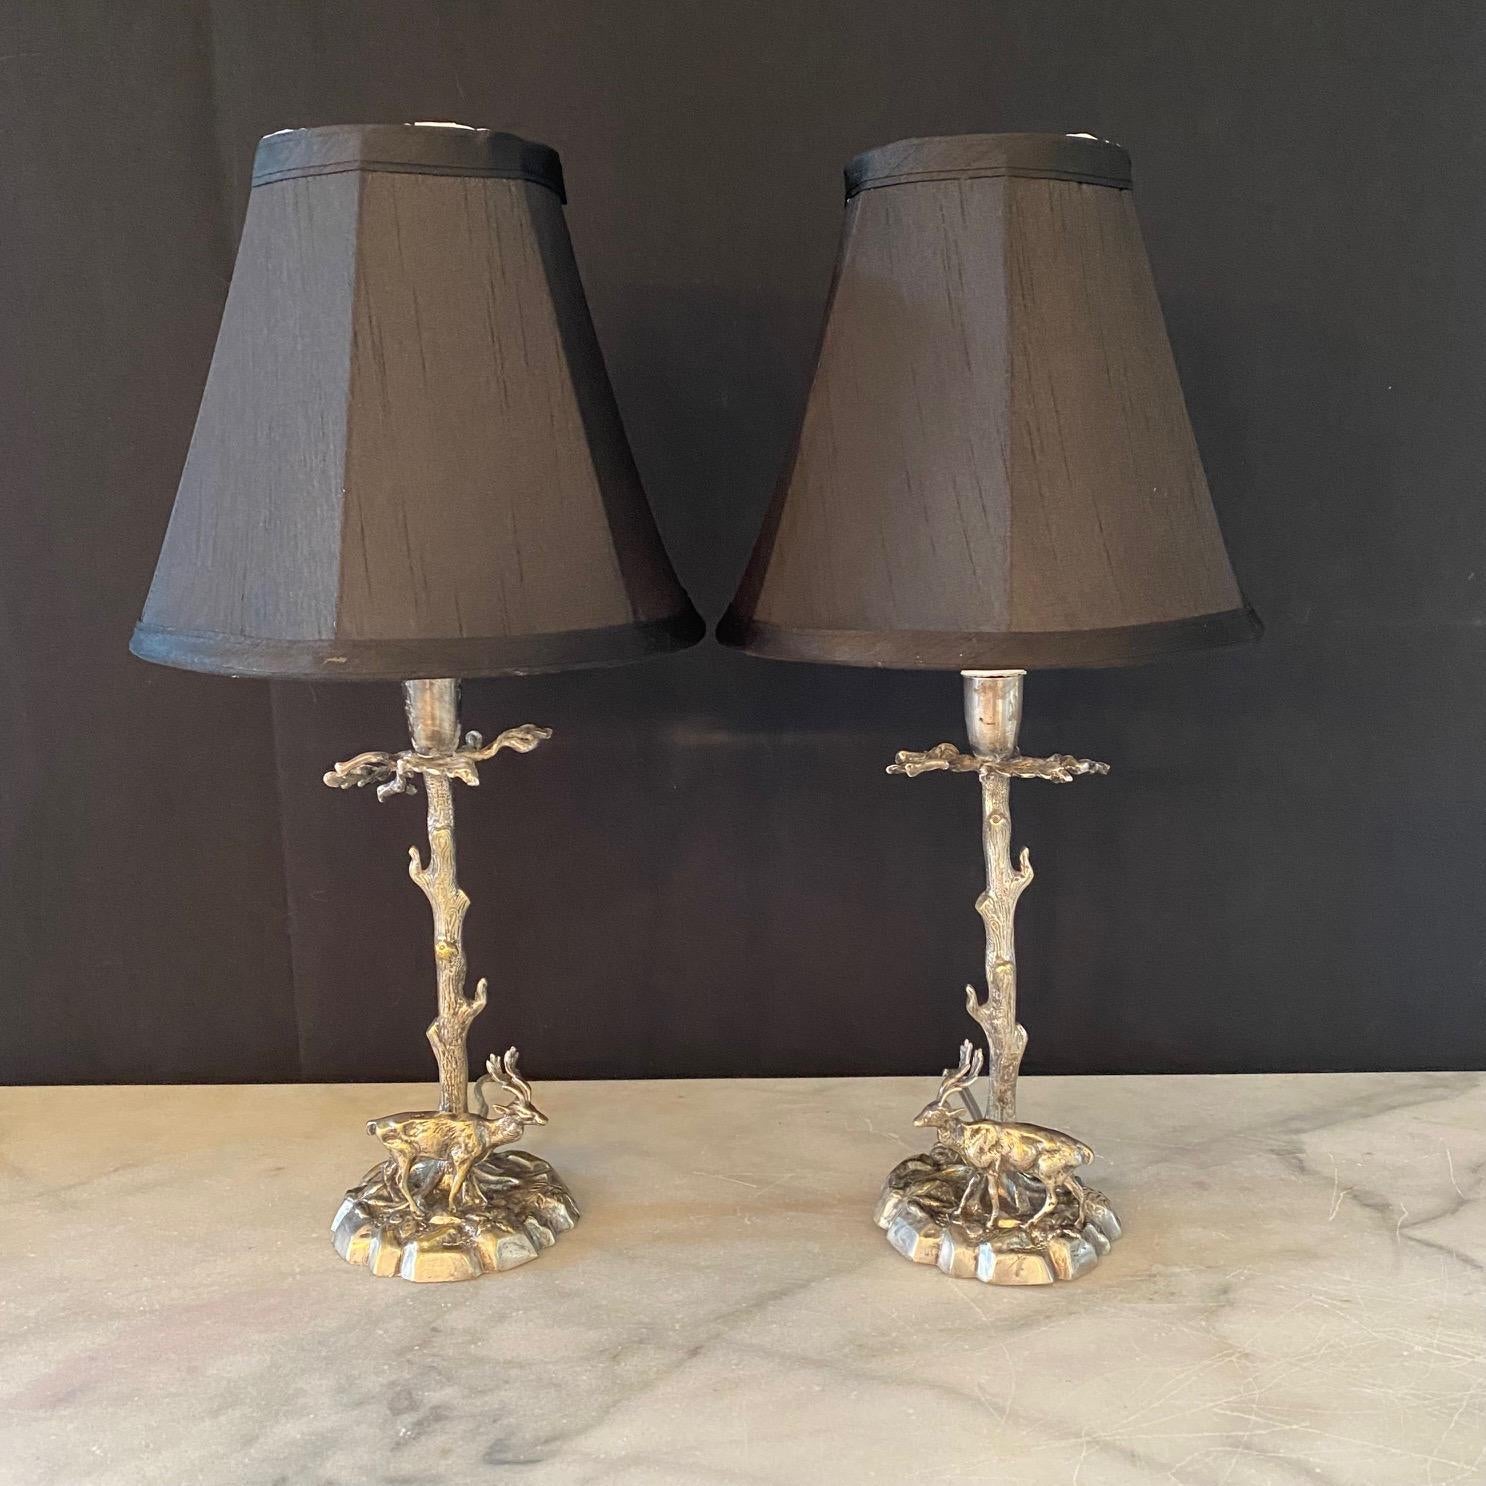 Pair of finely sculpted Valenti style stag table lamps, unsigned. Midcentury quality solid silvered plate on bronze sculpture most likely by the highly sought after Spanish artist Valenti. These sculptures depict a wild stag or deer on each lamp